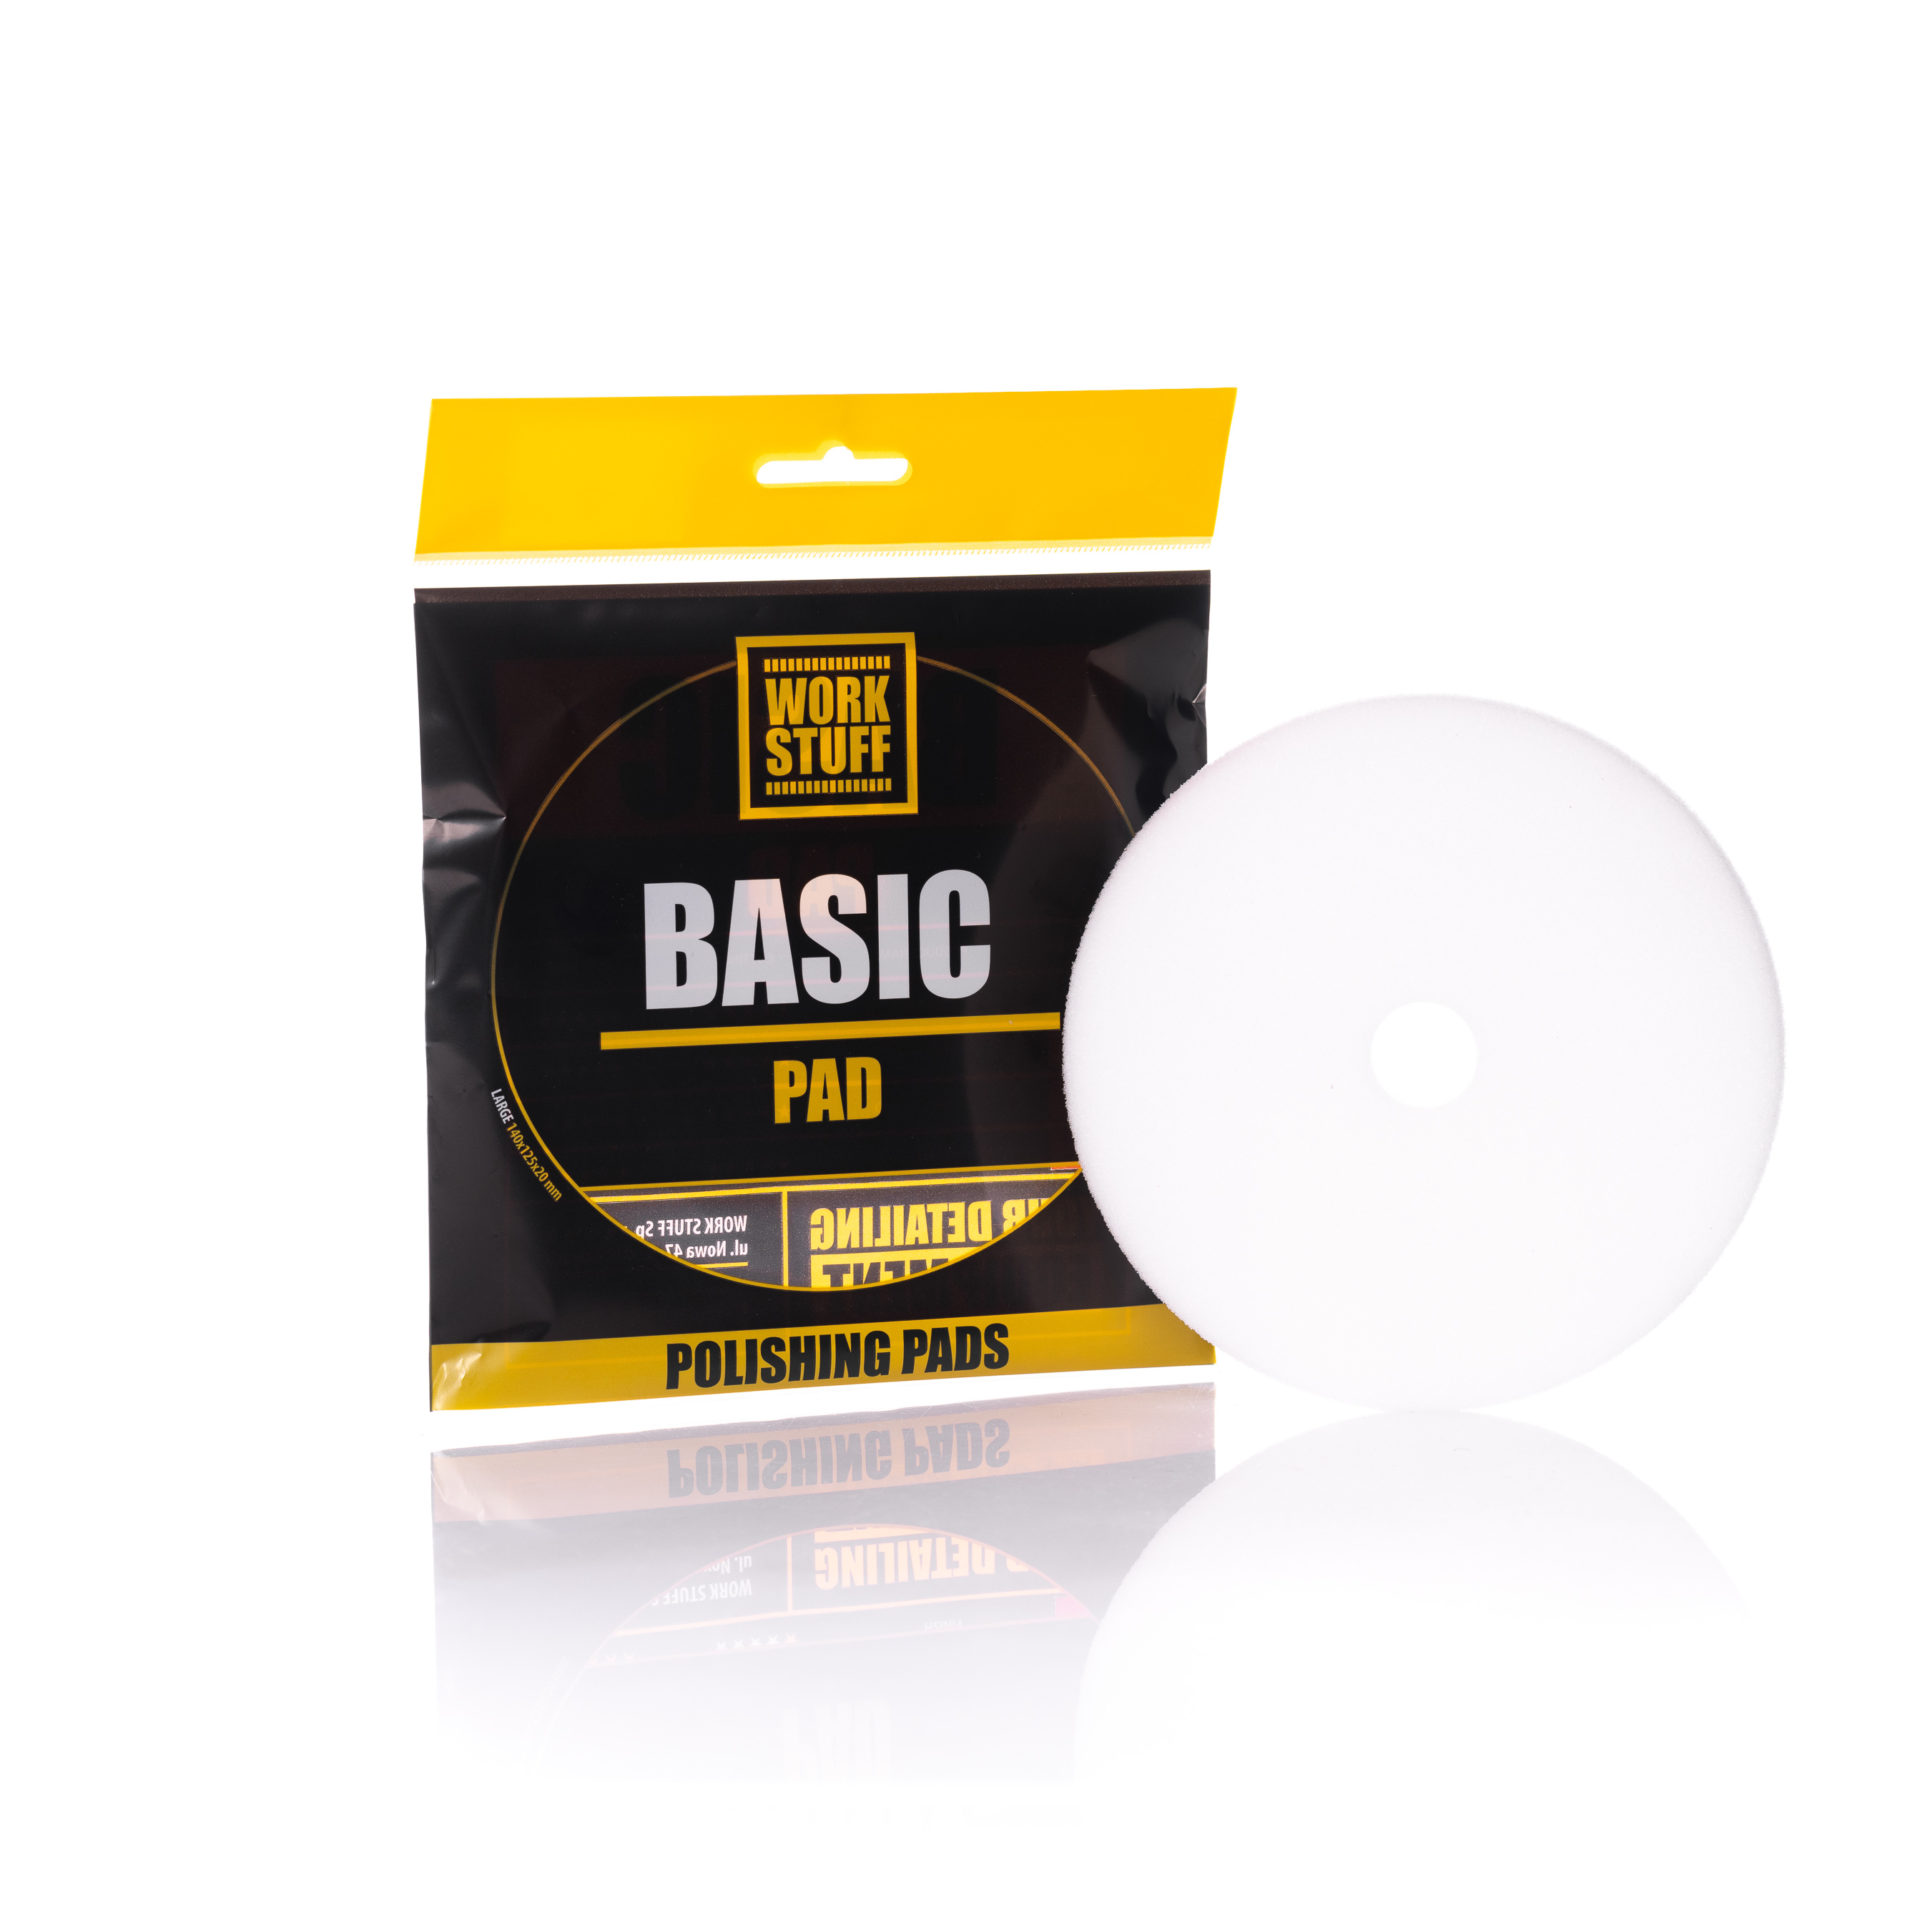 Effortlessly remove scratches and restore faded paint with the Work Stuff Basic Pad Cut cutting pad. Designed for professional use, it's perfect for removing deep defects and restoring the original shine of your car.